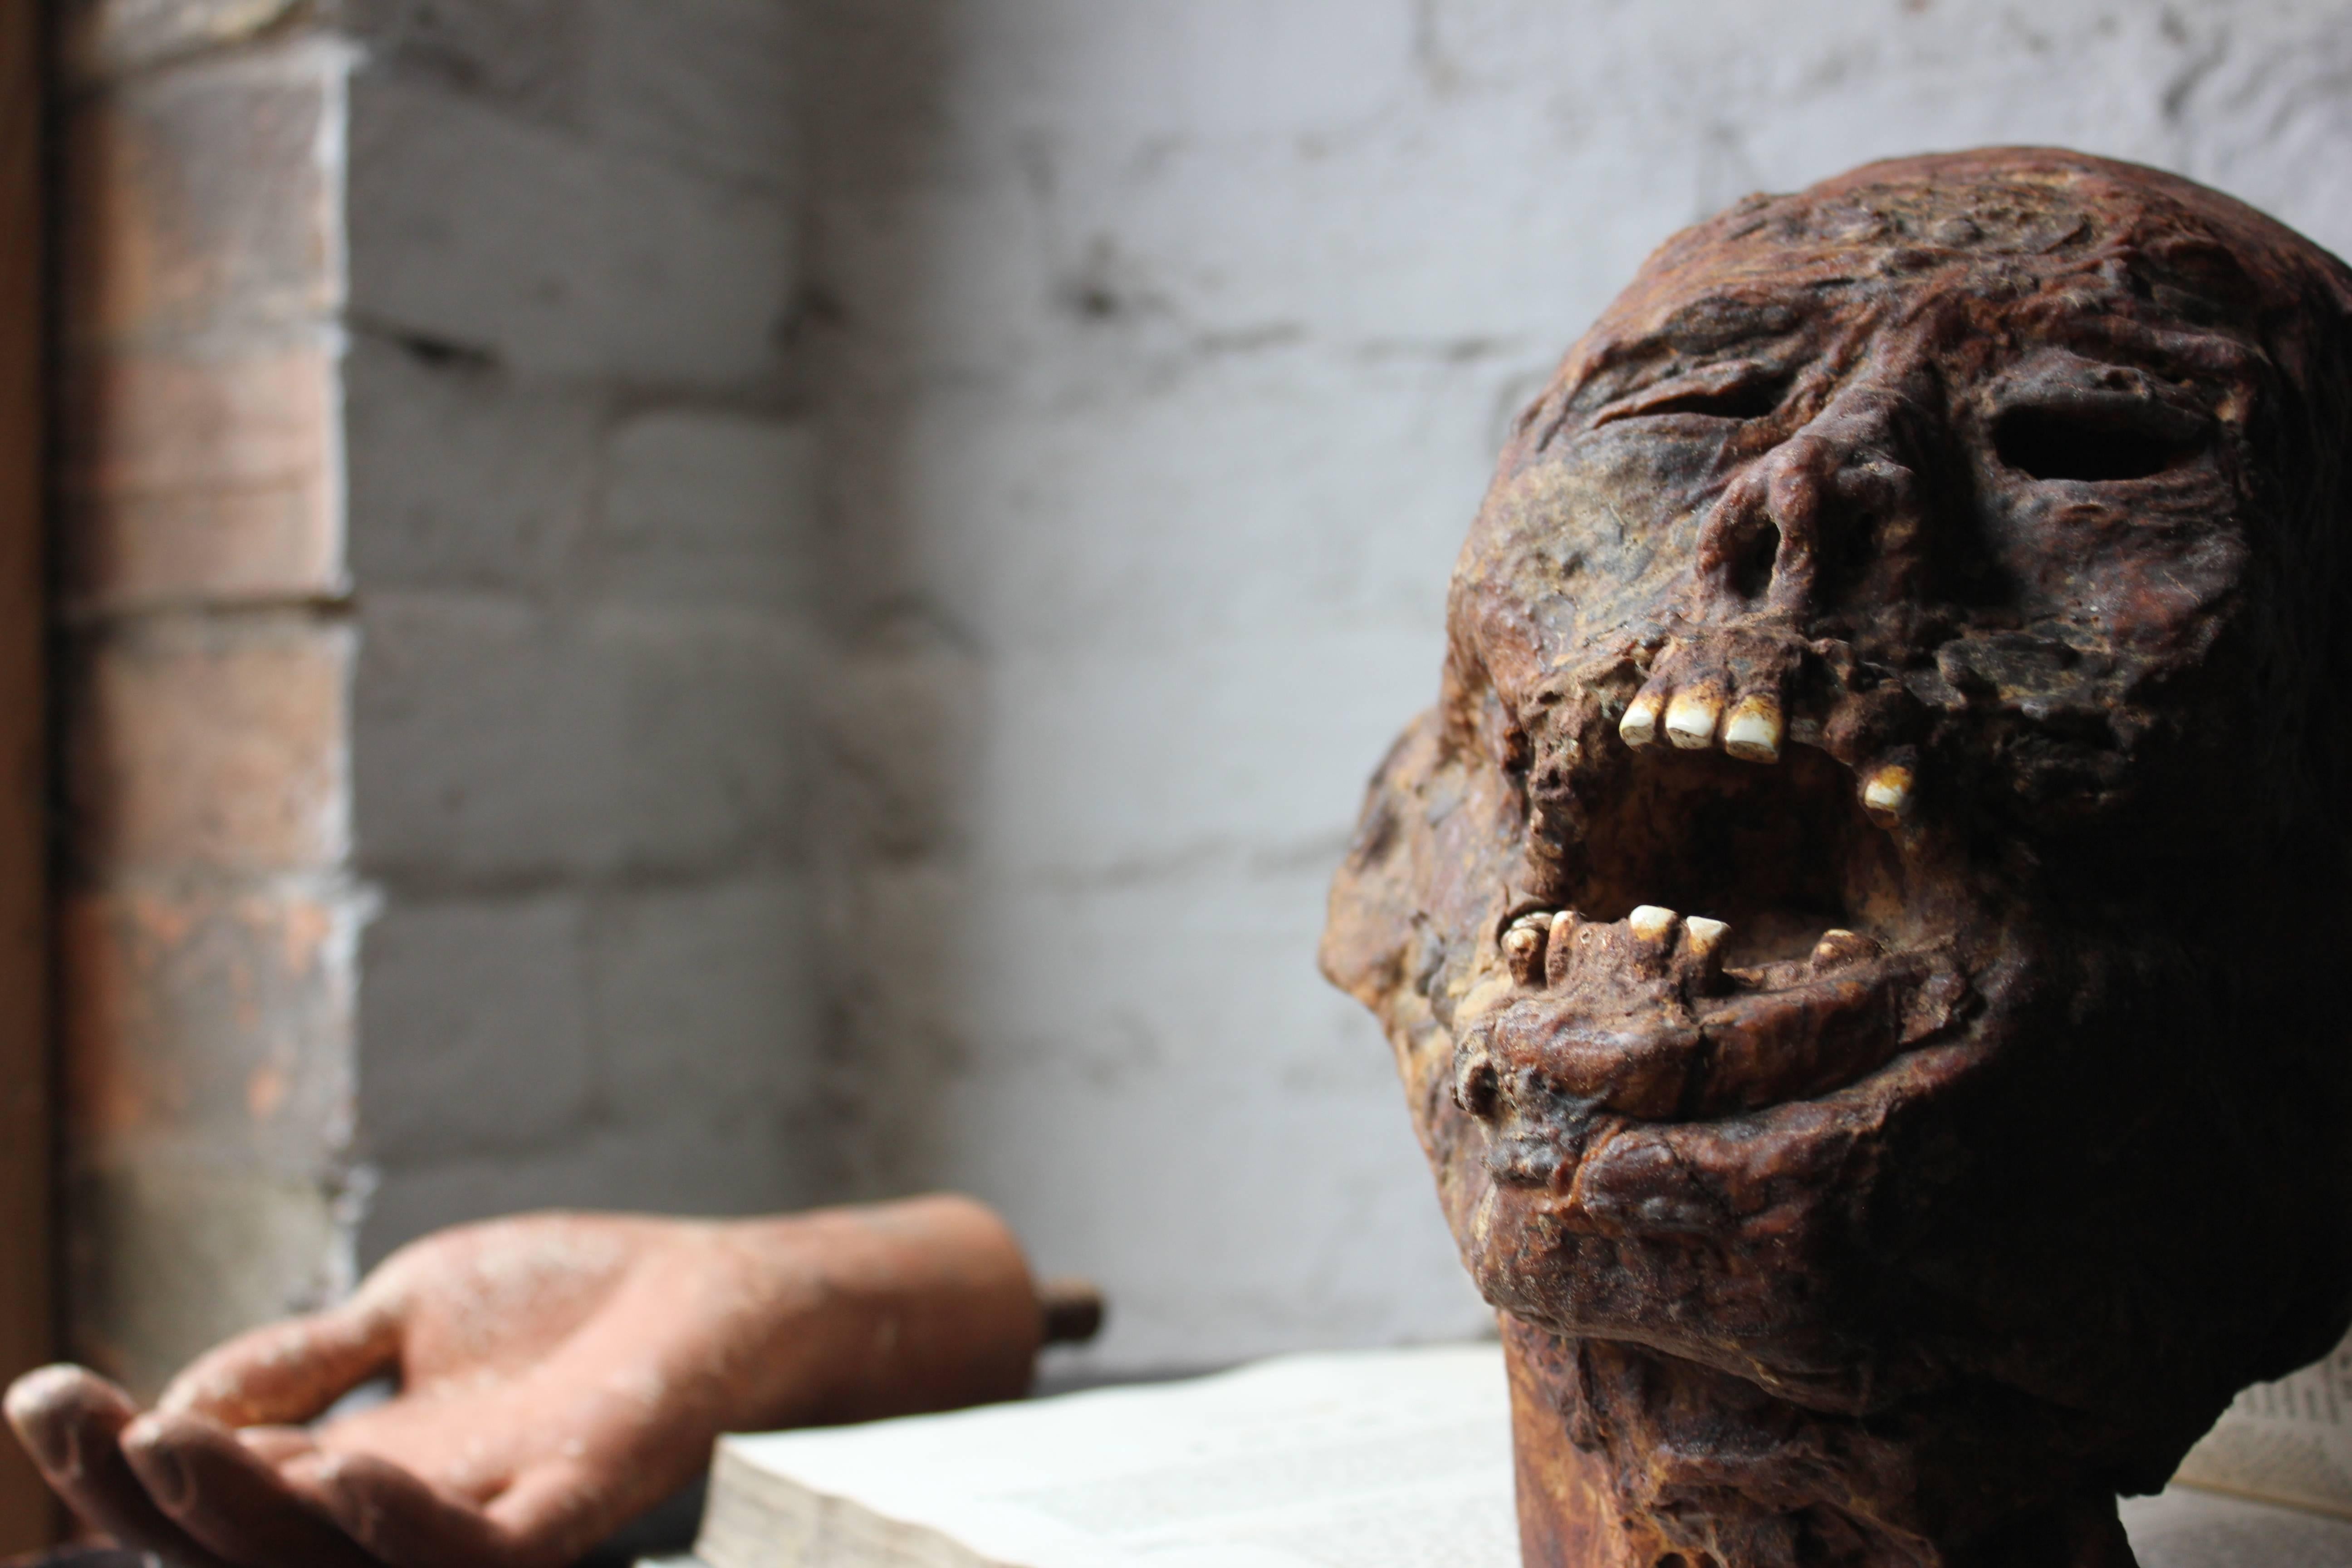 English Superbly Modelled Mummified Head Film Prop by Alan Friswell